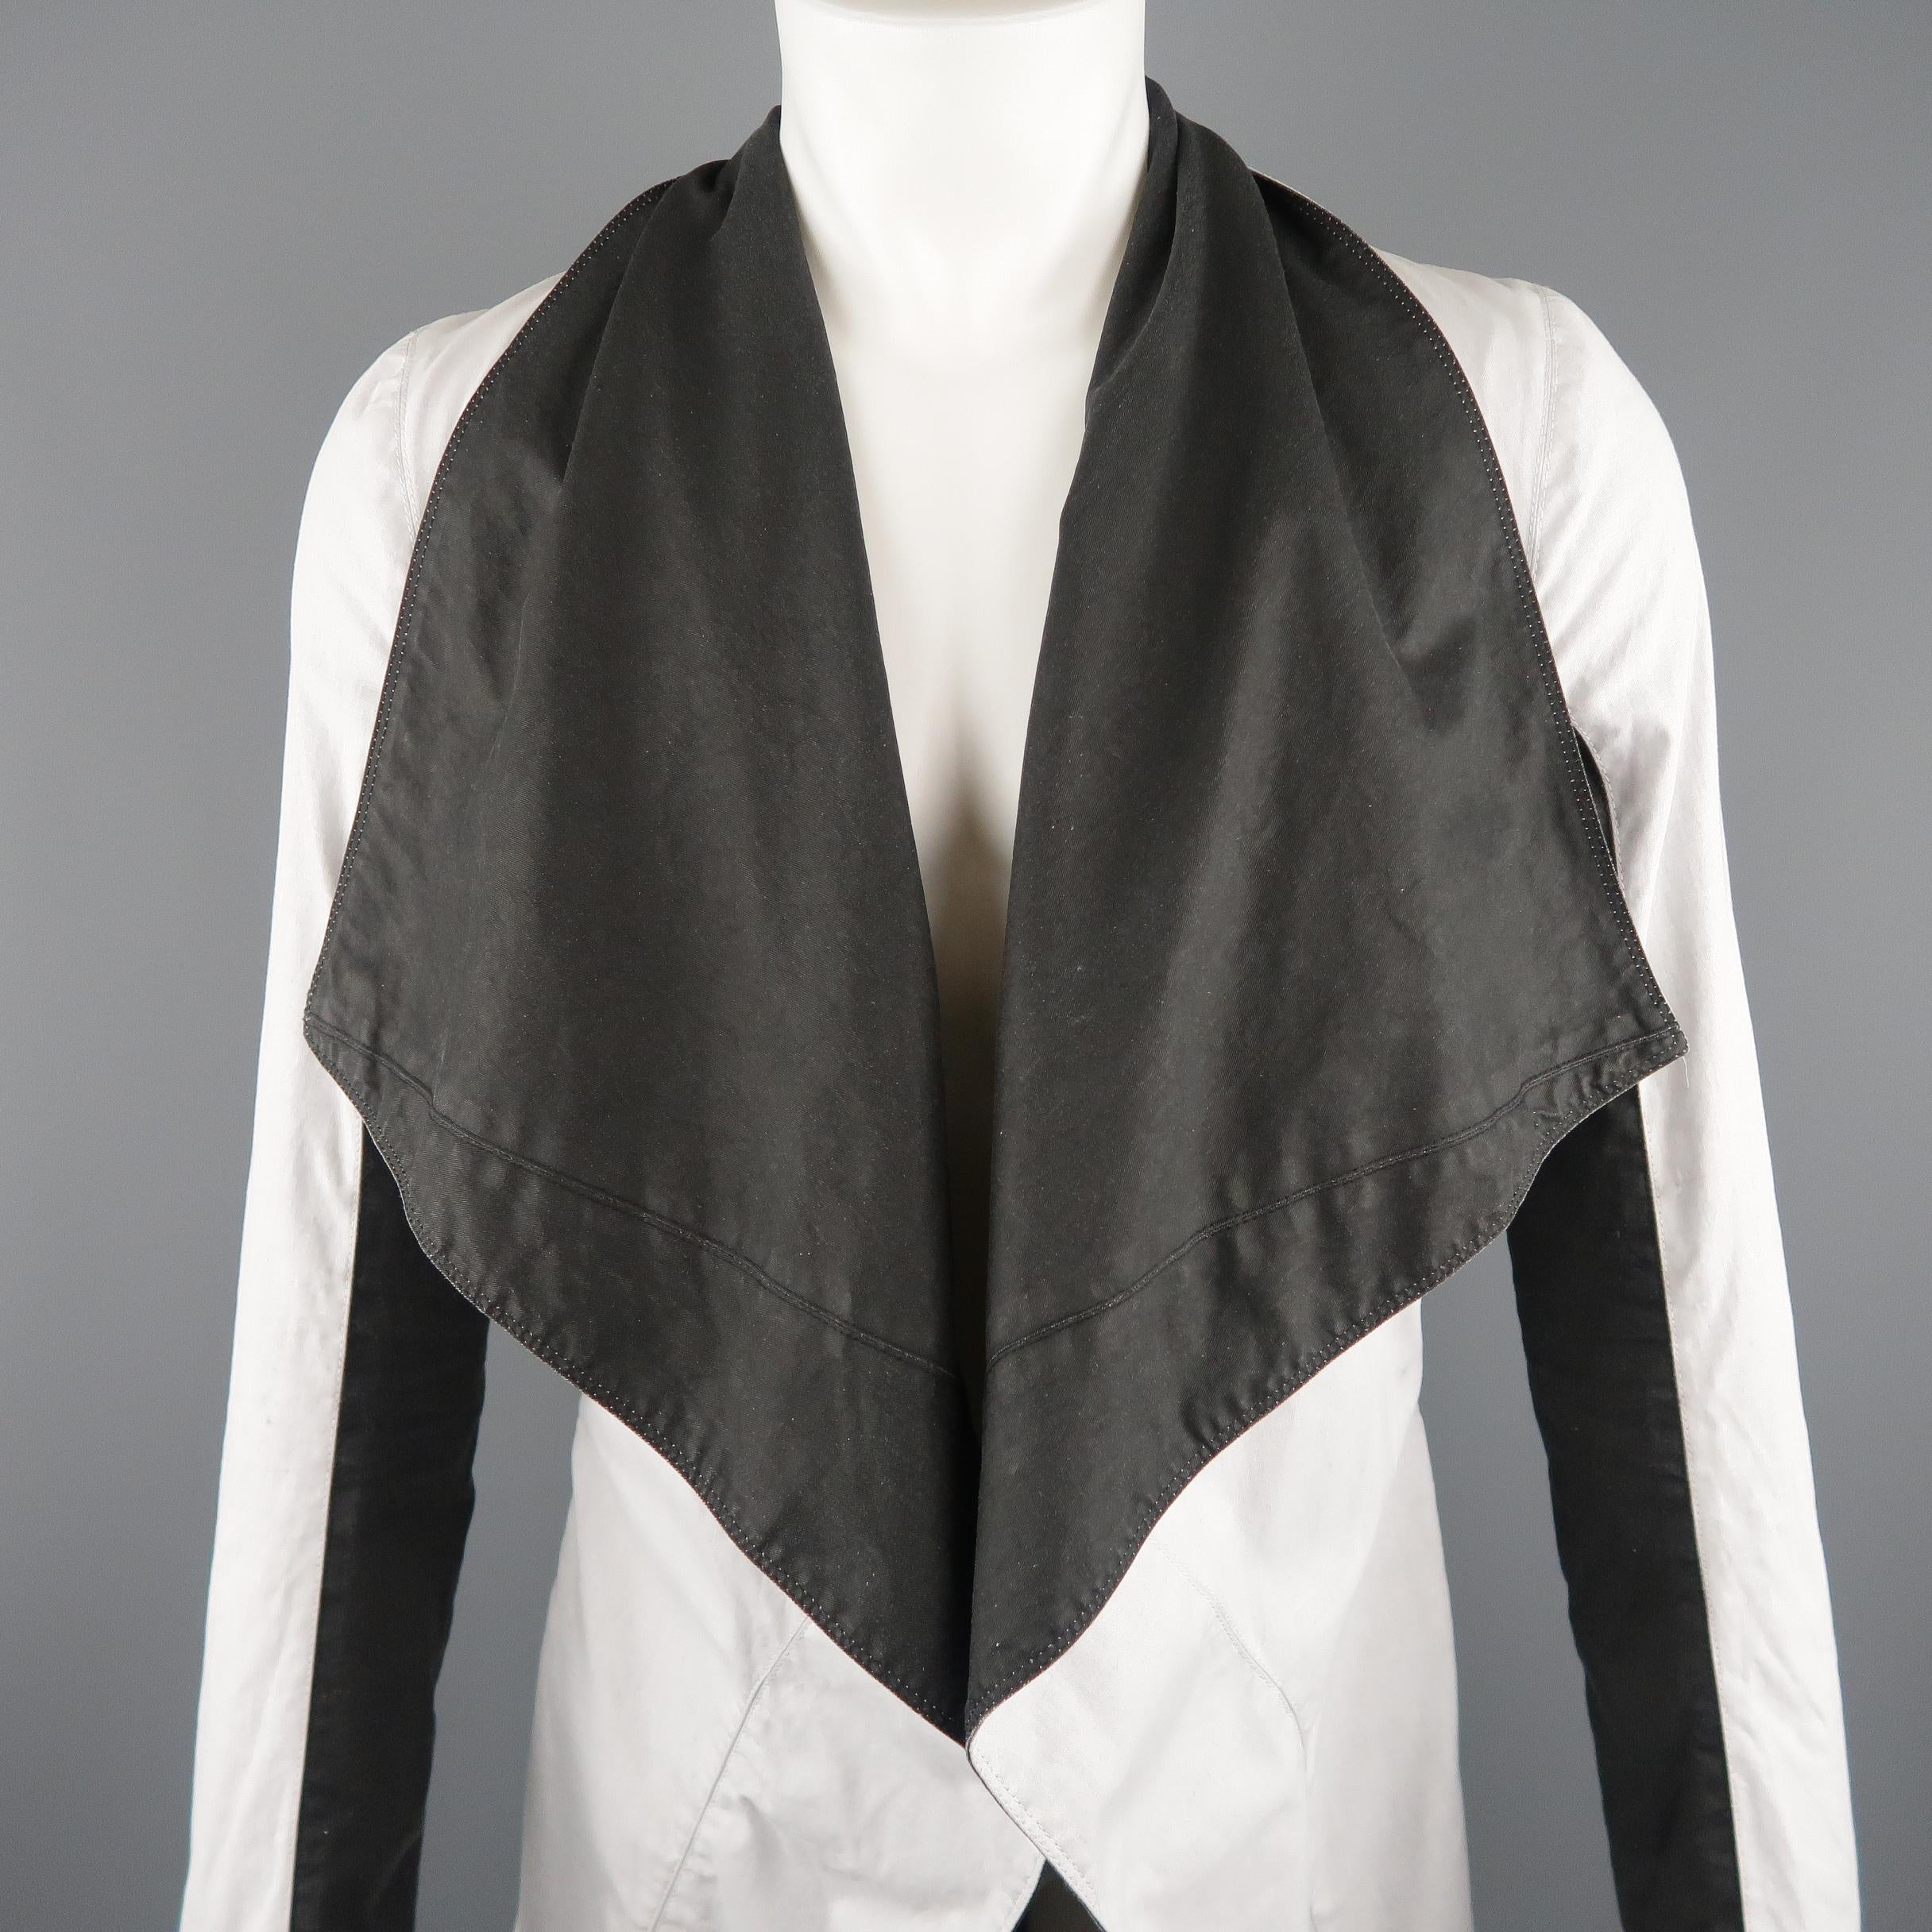 This rare GARETH PUGH coat comes in off white stretch cotton fabric with a draped, oversized black collar lapel, under arm color block panels, and tied closure. Fading and minor wear. Made in Italy.
 
Good Pre-Owned Condition.
Marked: IT 46
